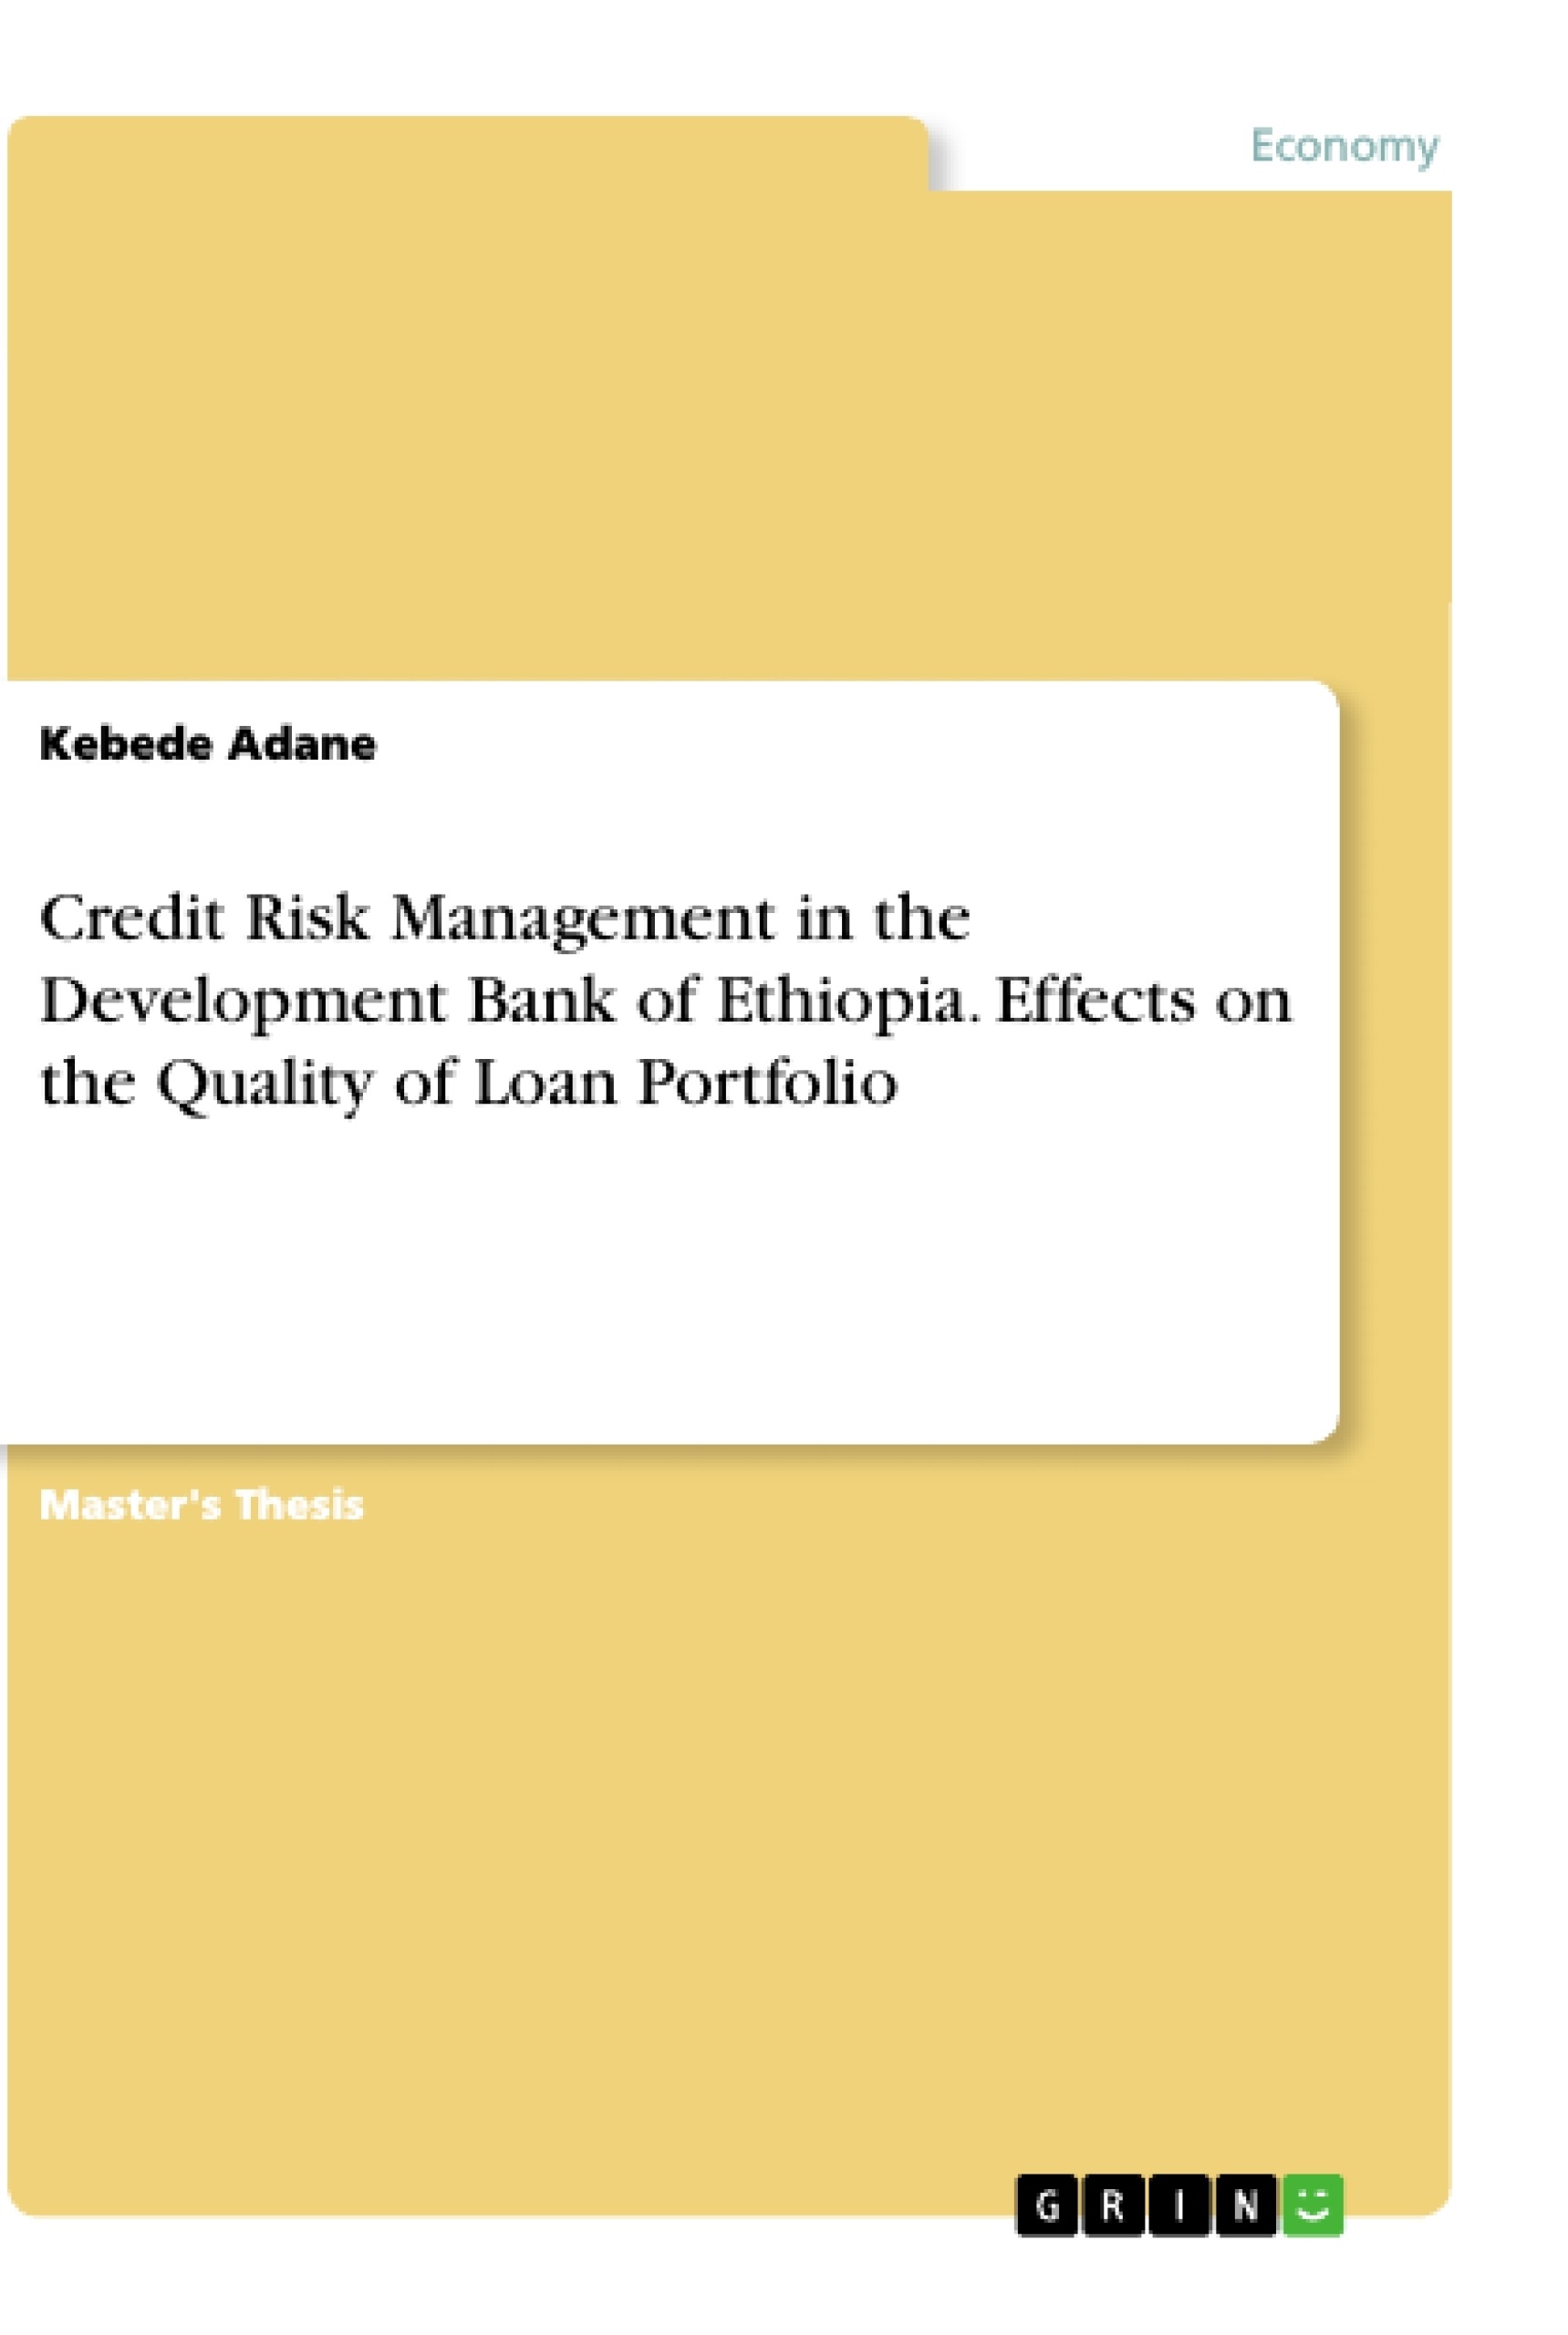 Title: Credit Risk Management in the Development Bank of Ethiopia. Effects on the Quality of Loan Portfolio